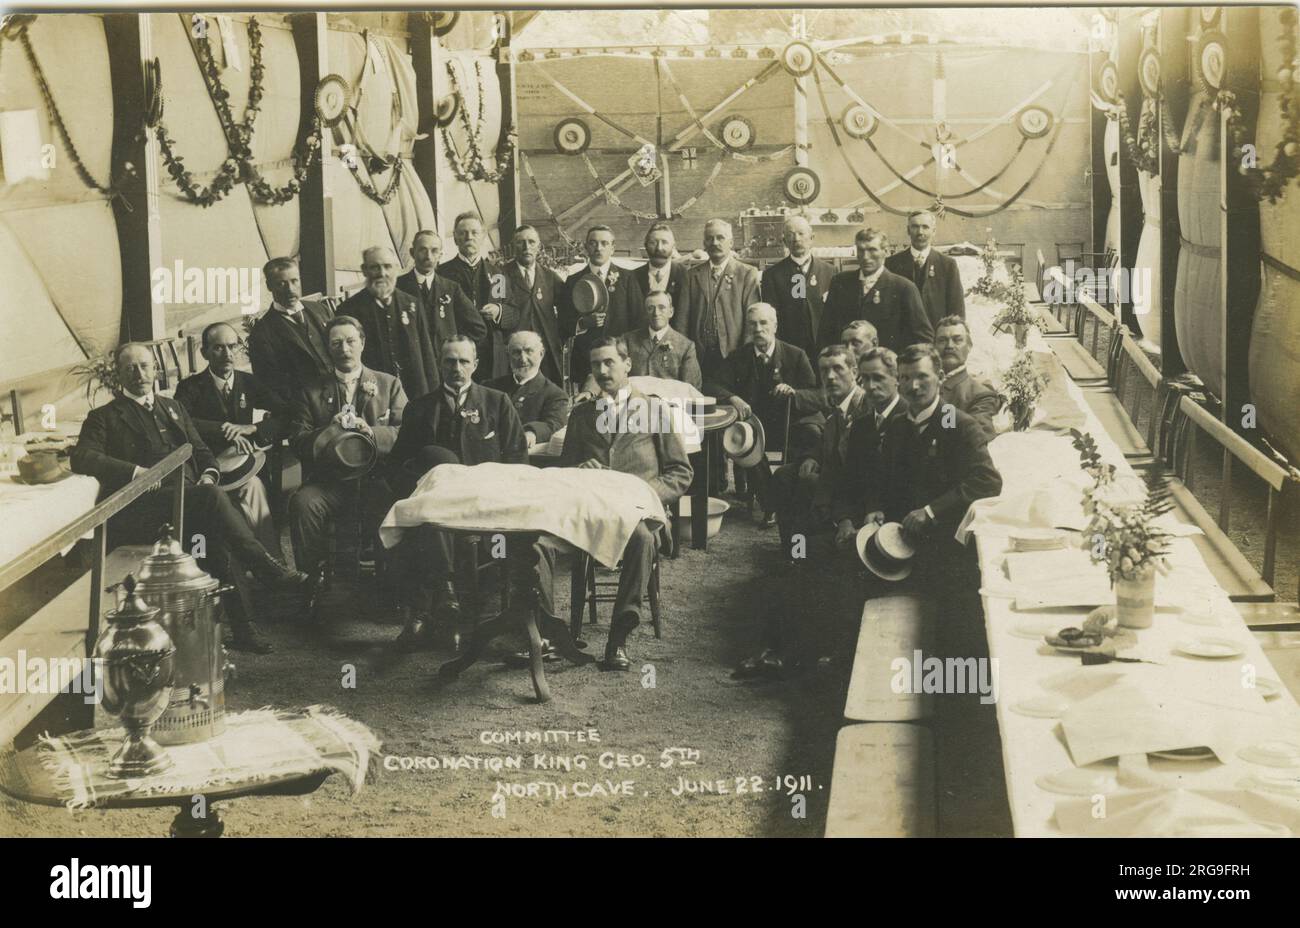 Village Committee (Celebrating the Coronation of King George V - June 22nd 1911), North Cave, Brough, Yorkshire, England. Stock Photo